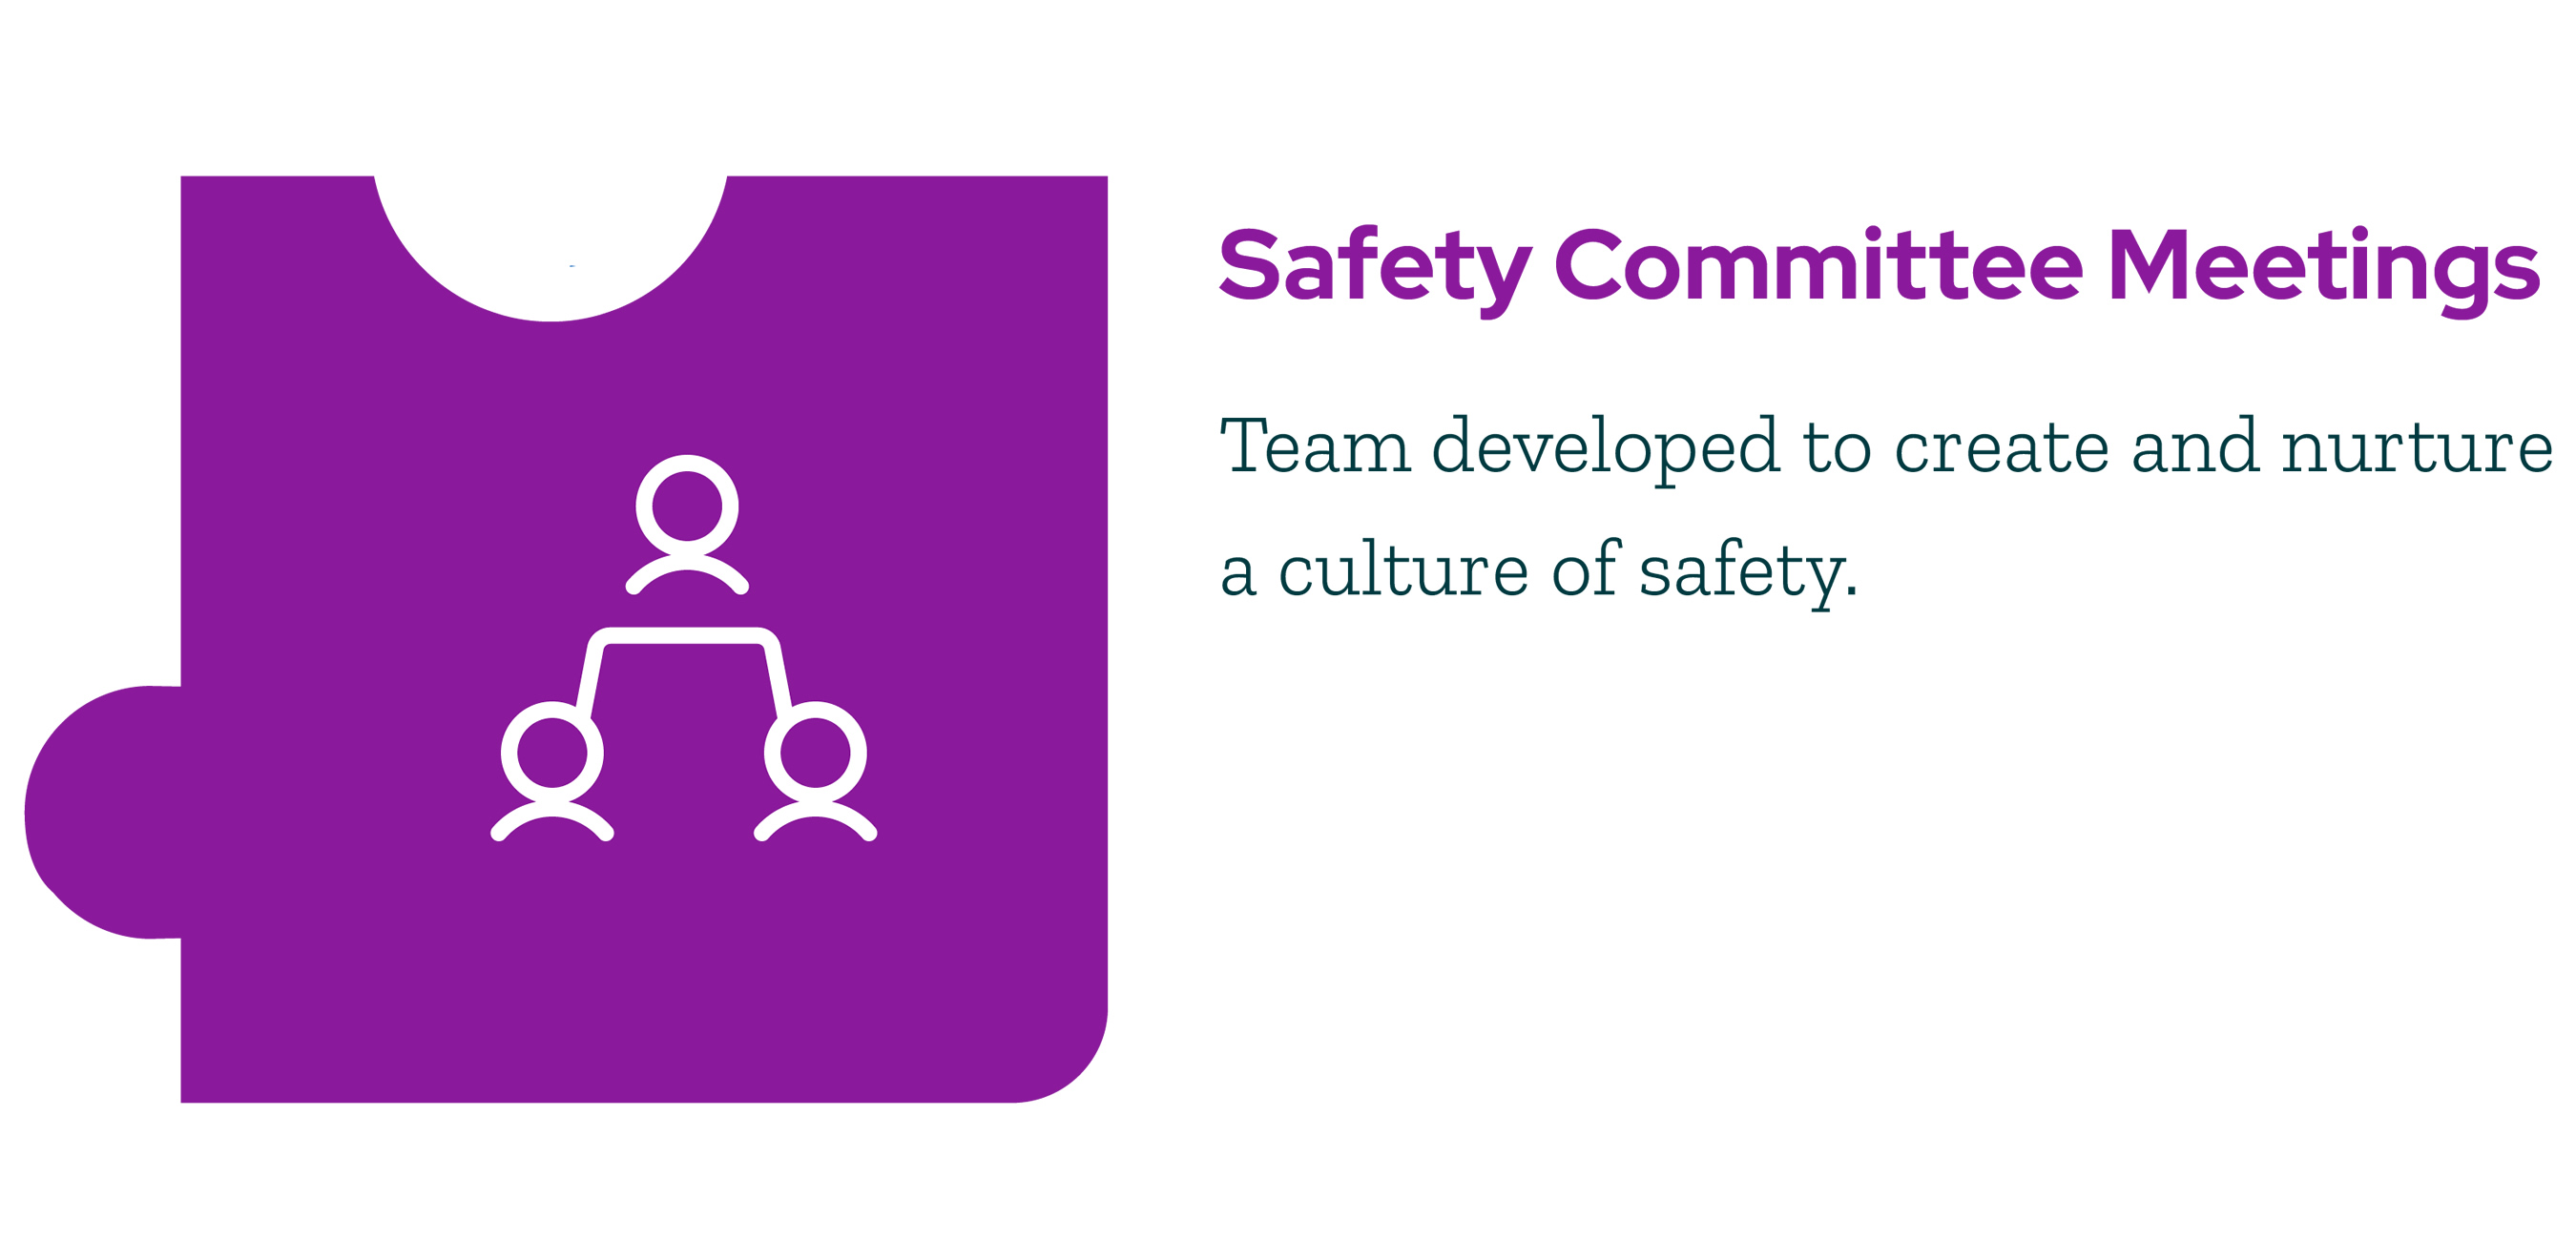 Safety Committee - Team developed to create and nurture a culture of safety